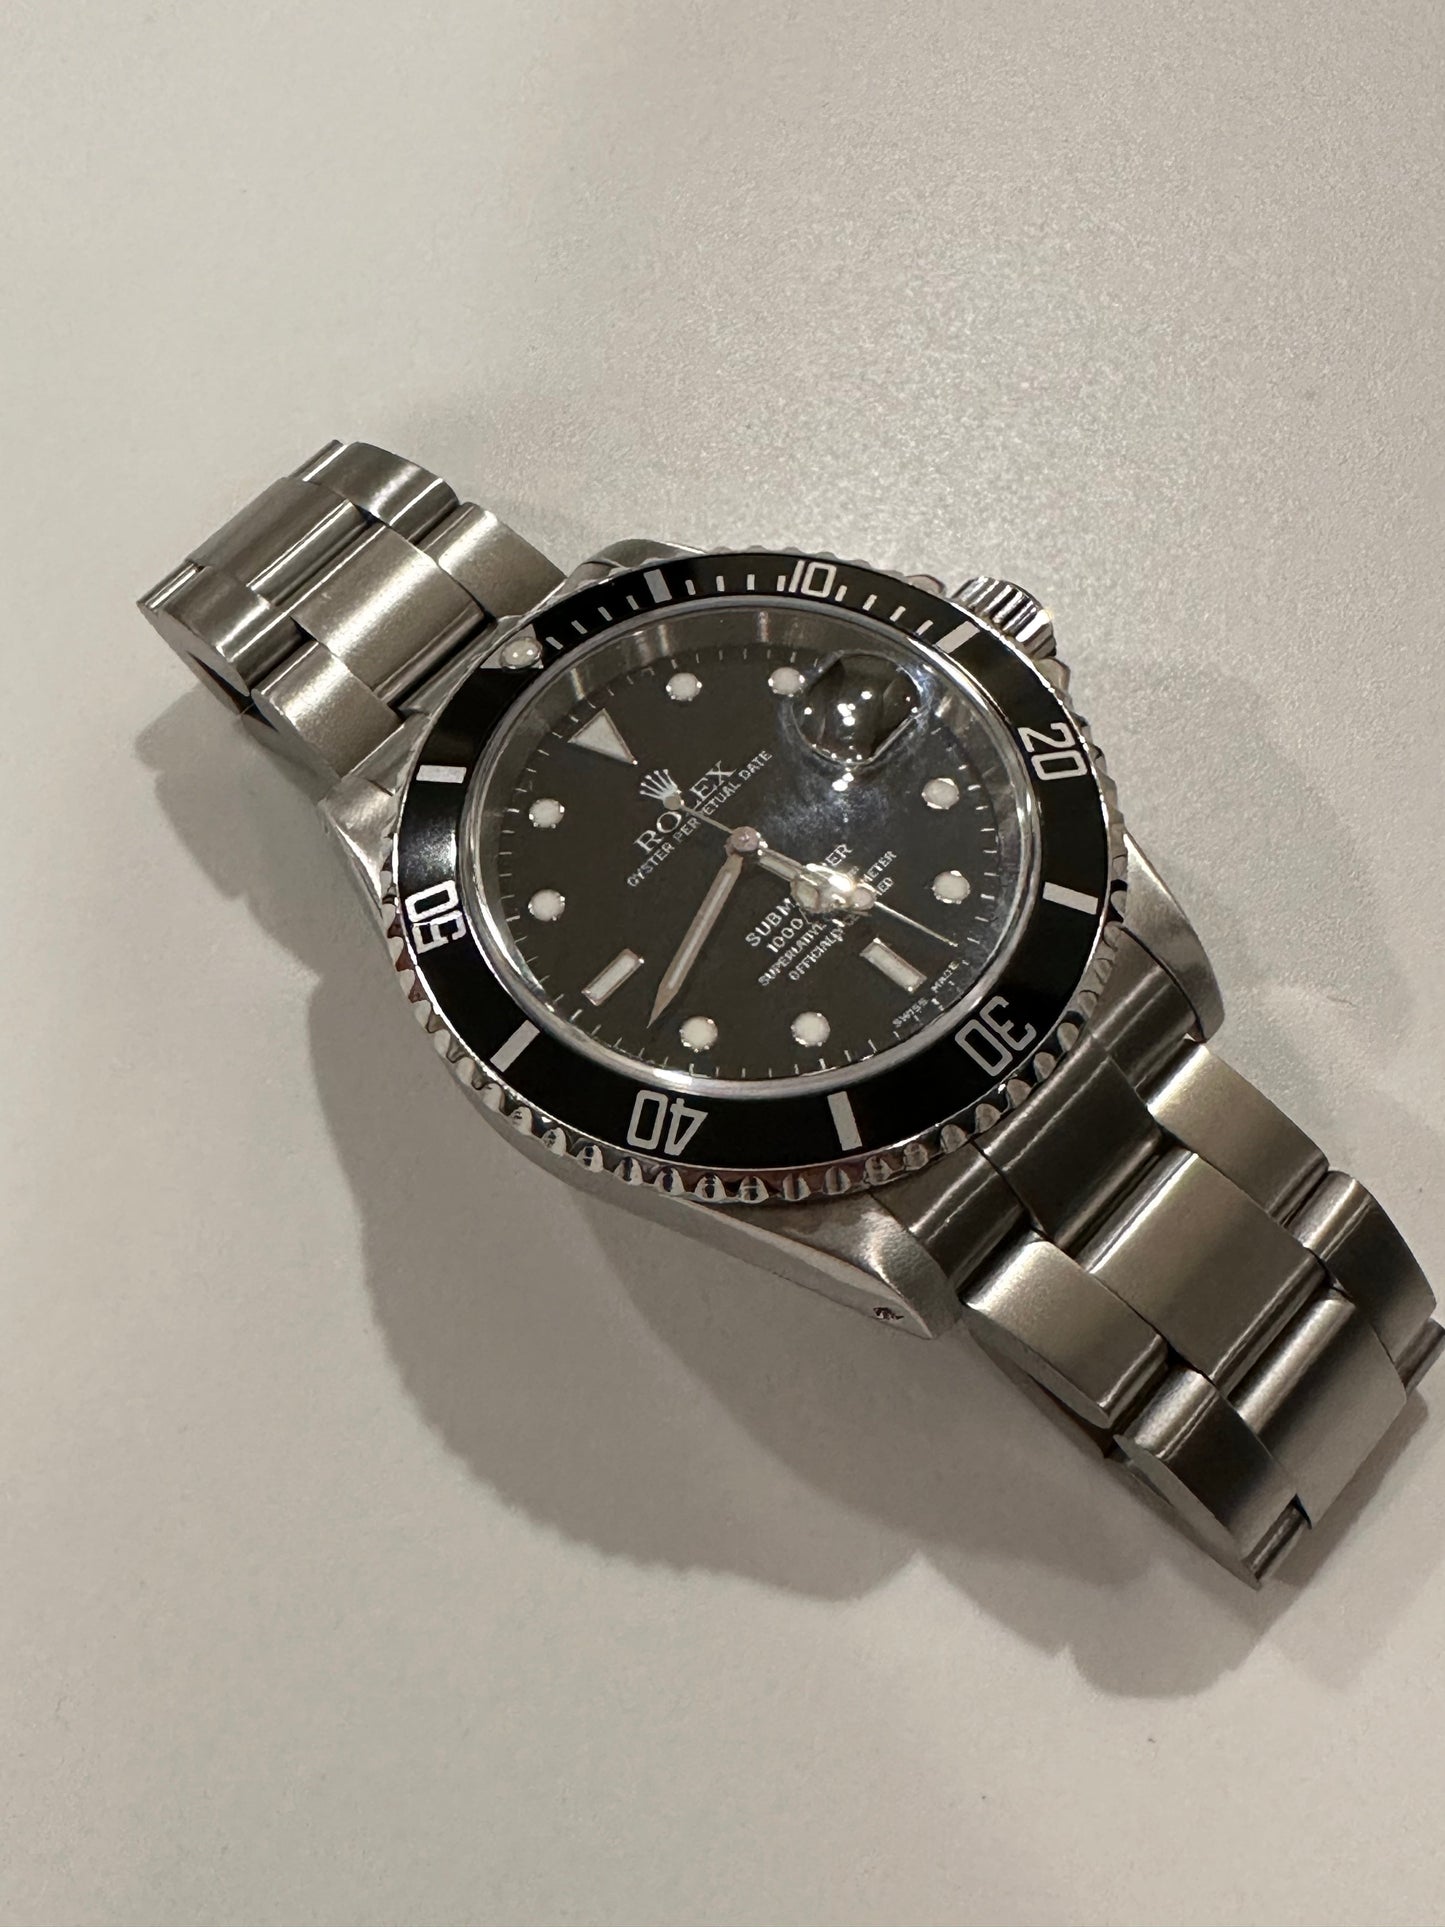 MINT Rolex Submariner Date SEL 40mm Black Stainless Steel Dive Watch 16610